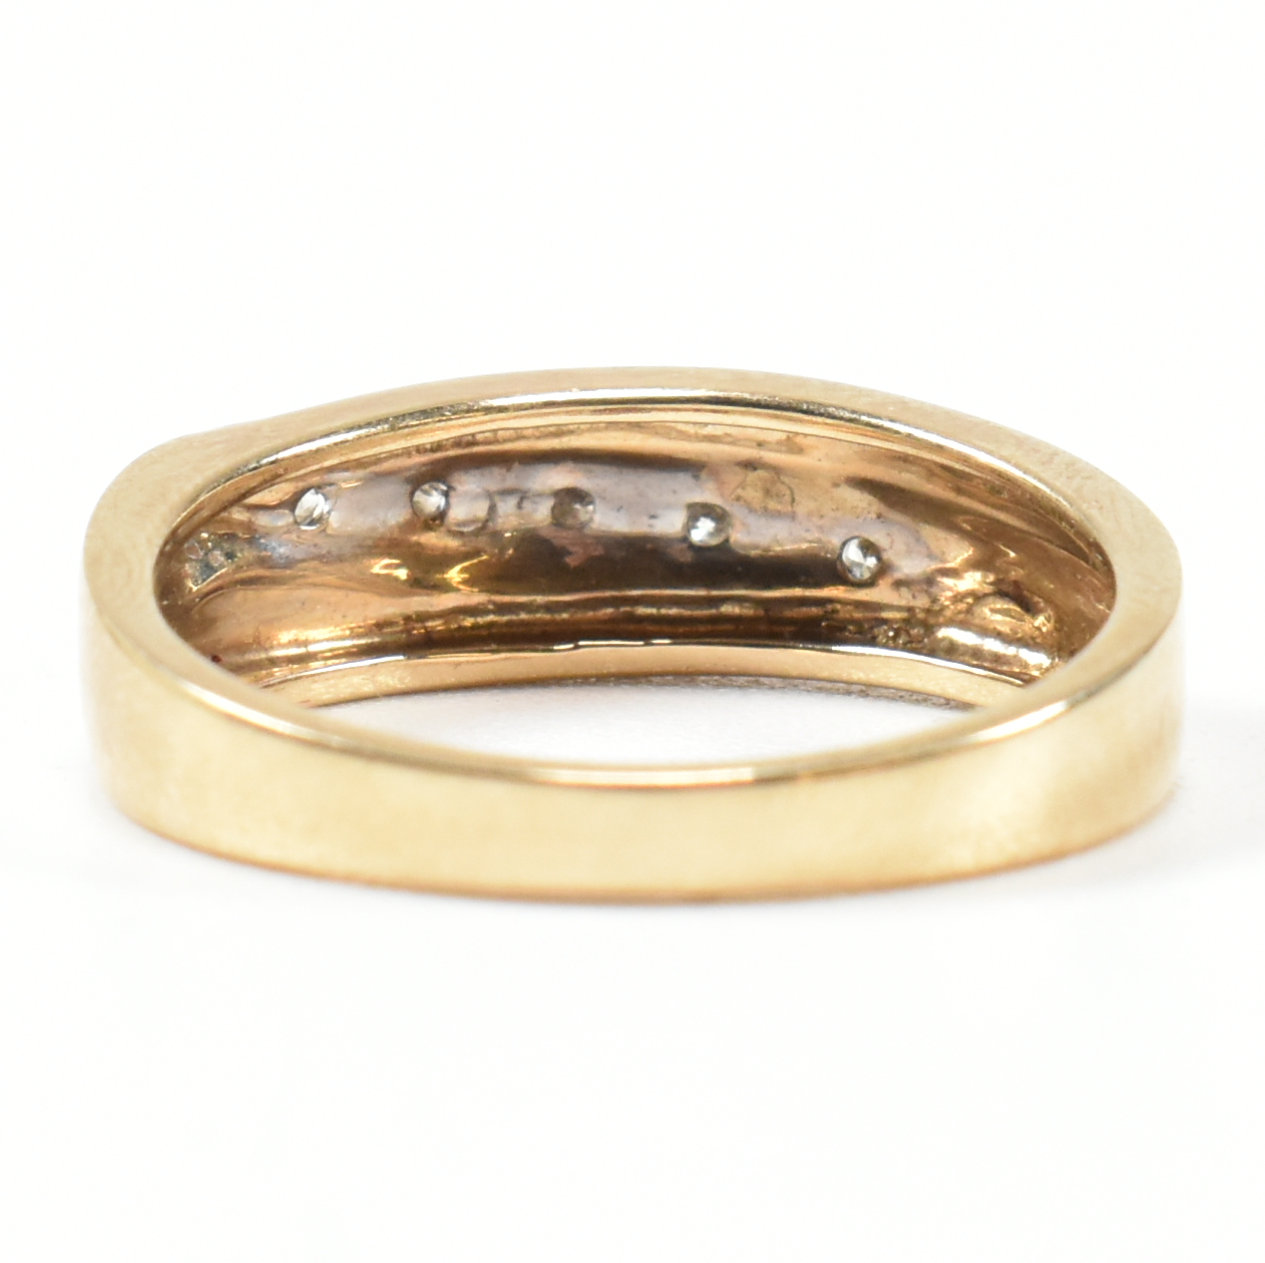 HALLMARKED 9CT GOLD & DIAMOND TWO TONE BAND RING - Image 3 of 9